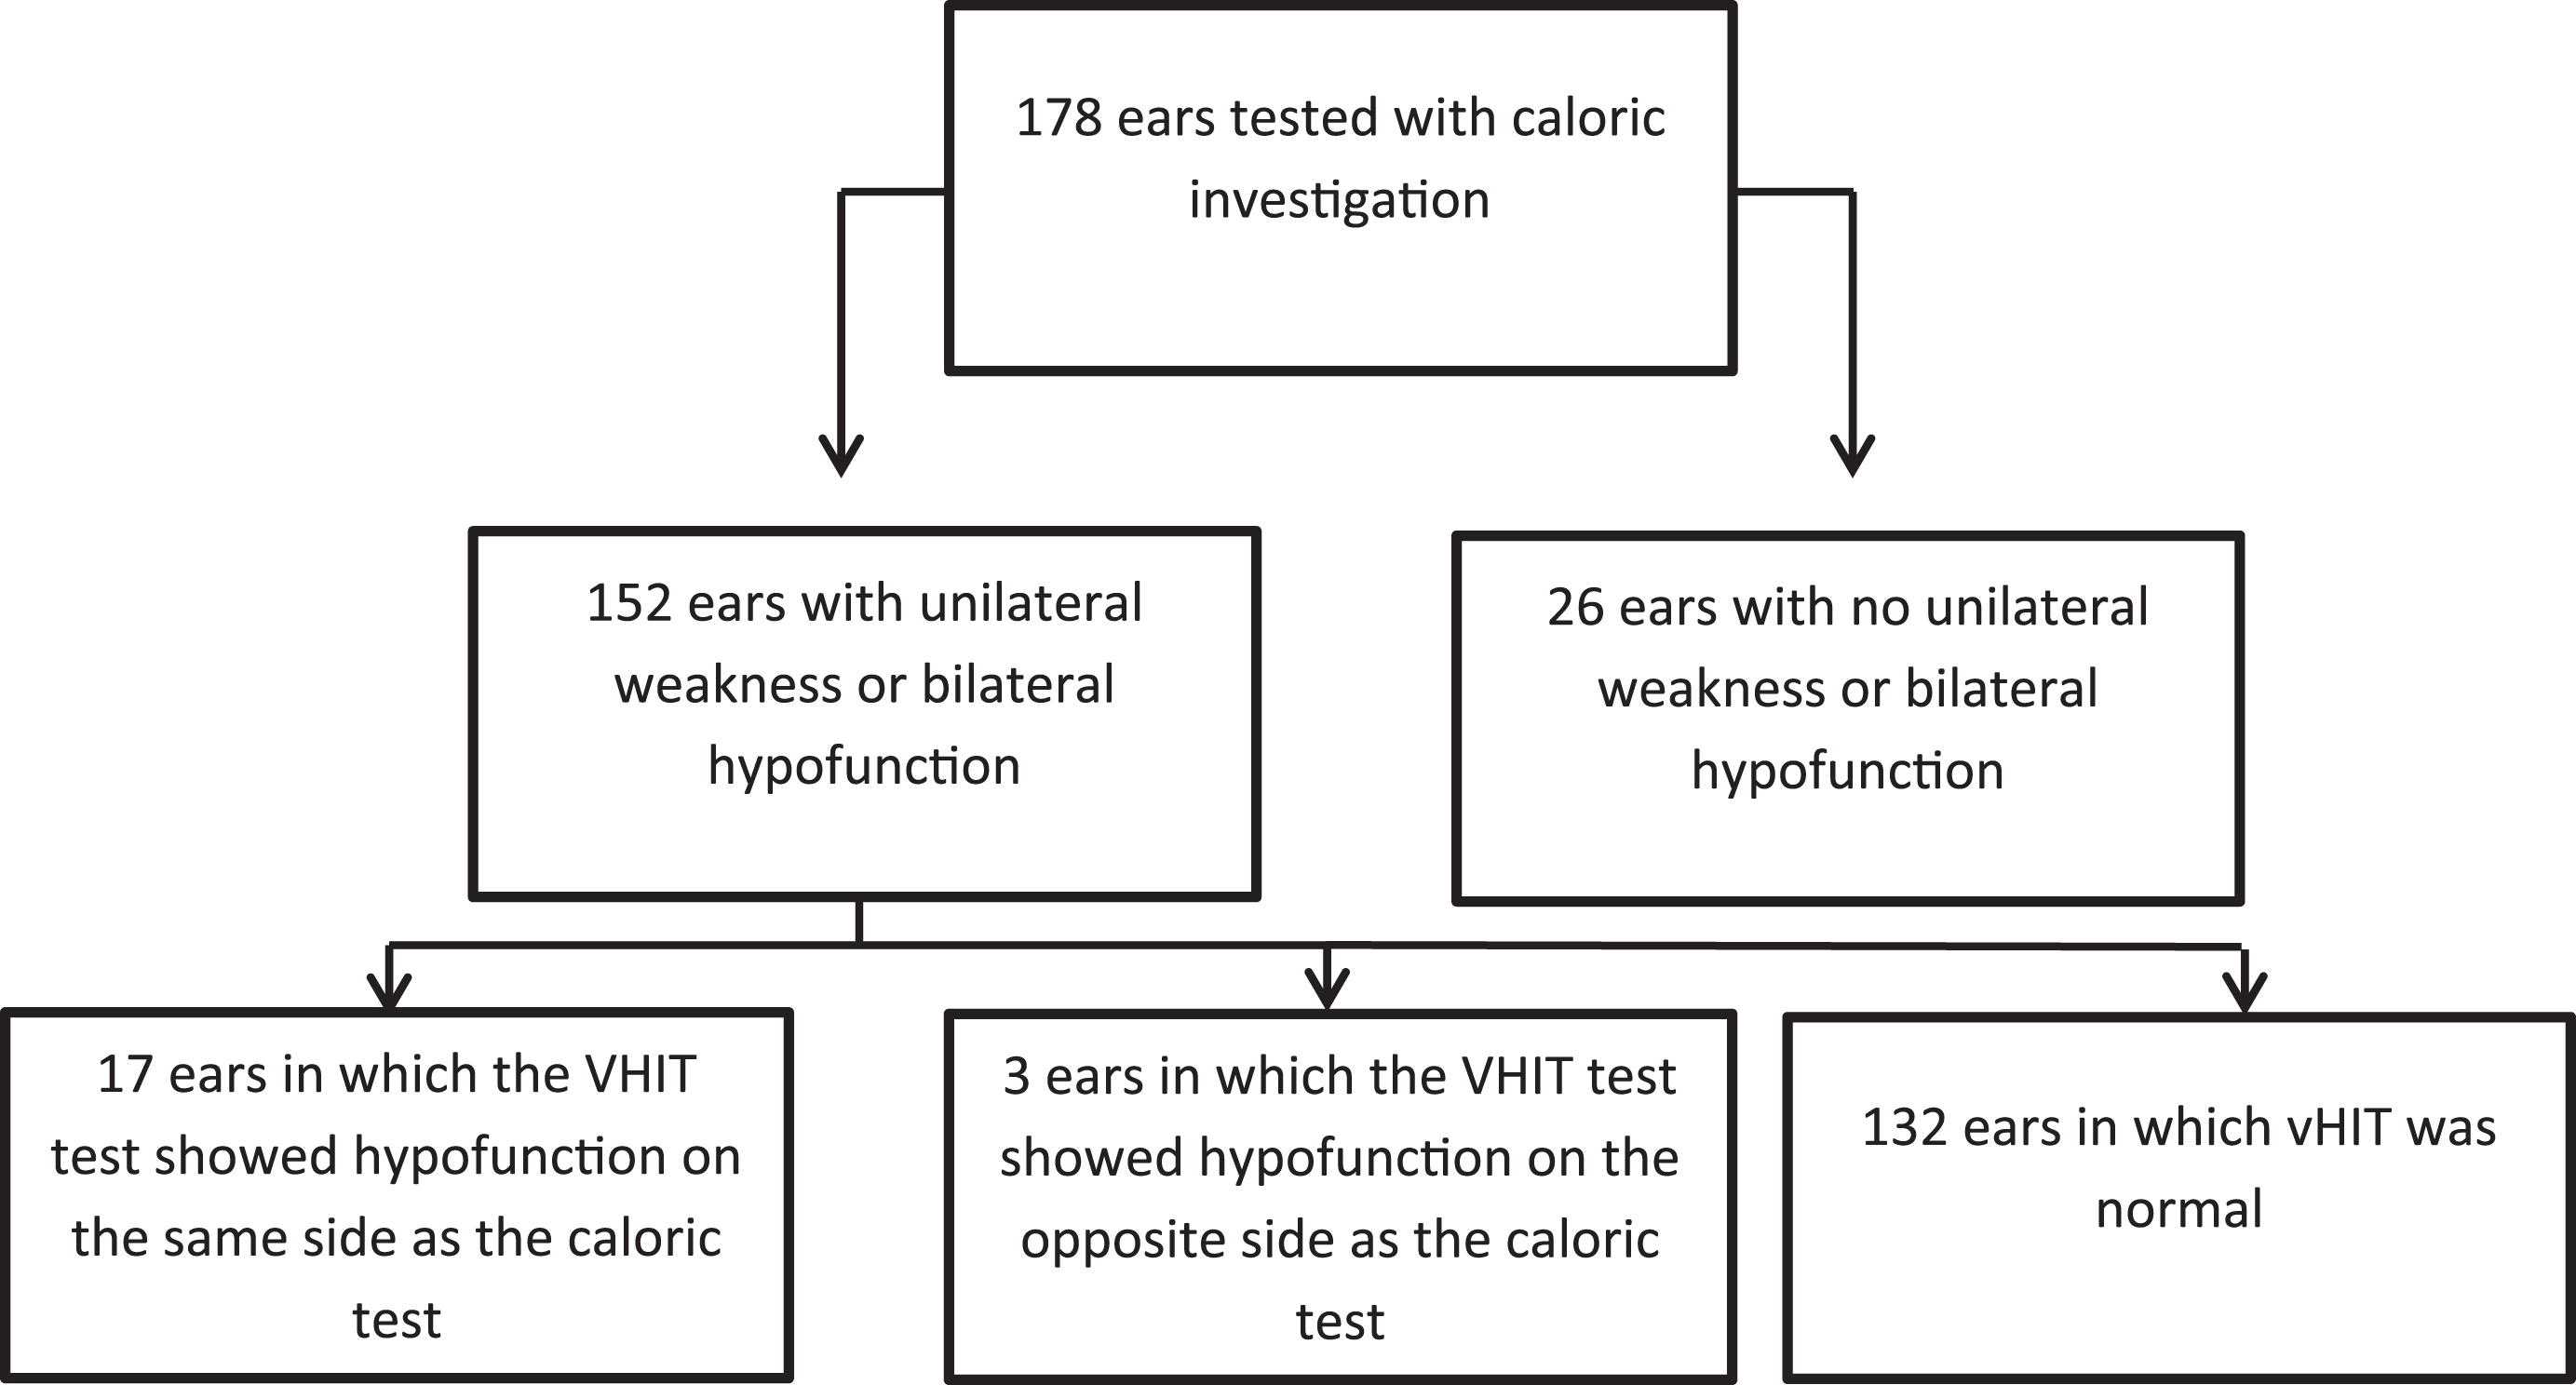 Results per ear regarding ipsilesional and contralesion vHIT test results based on a unilateral caloric weakness or bilateral hypofunction.